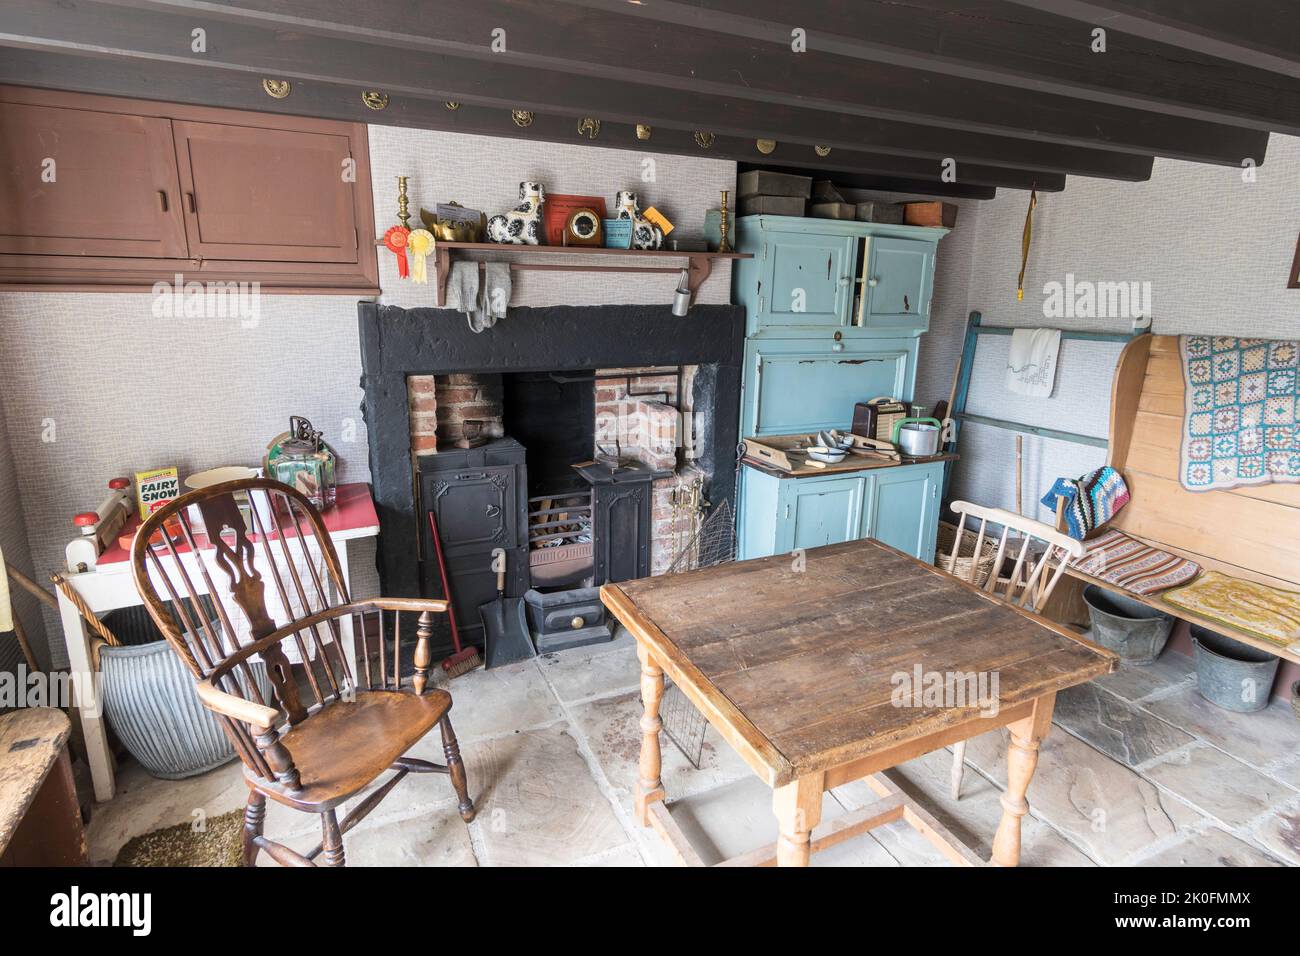 The kitchen of a farmhouse from Spain's Field Farm as it would have looked in the 1950s, Beamish Museum, England UK. Stock Photo